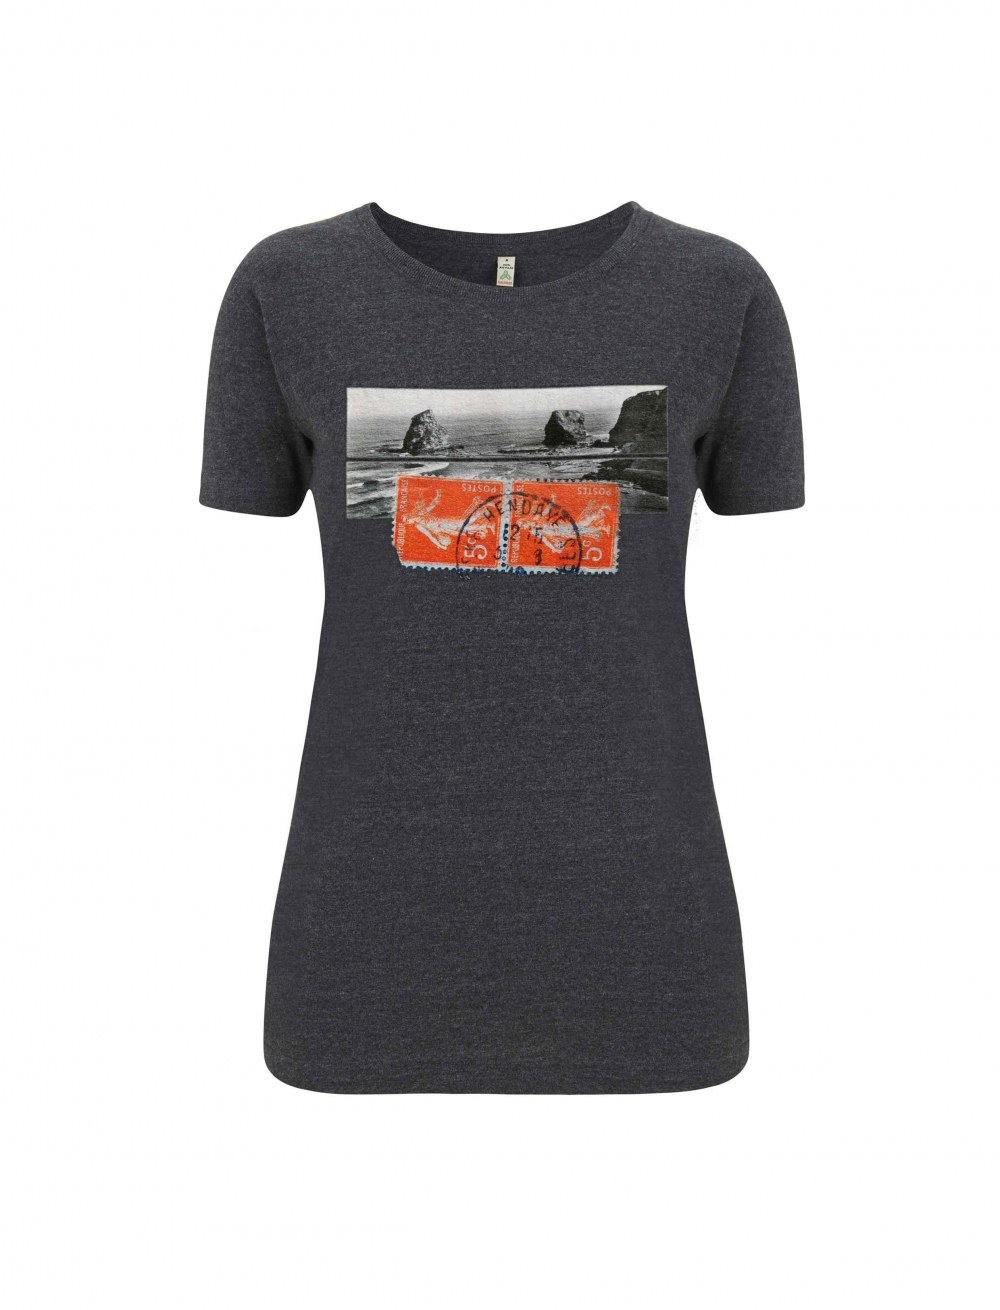 Recycled classic t-shirt with a vintage image of Hendaye